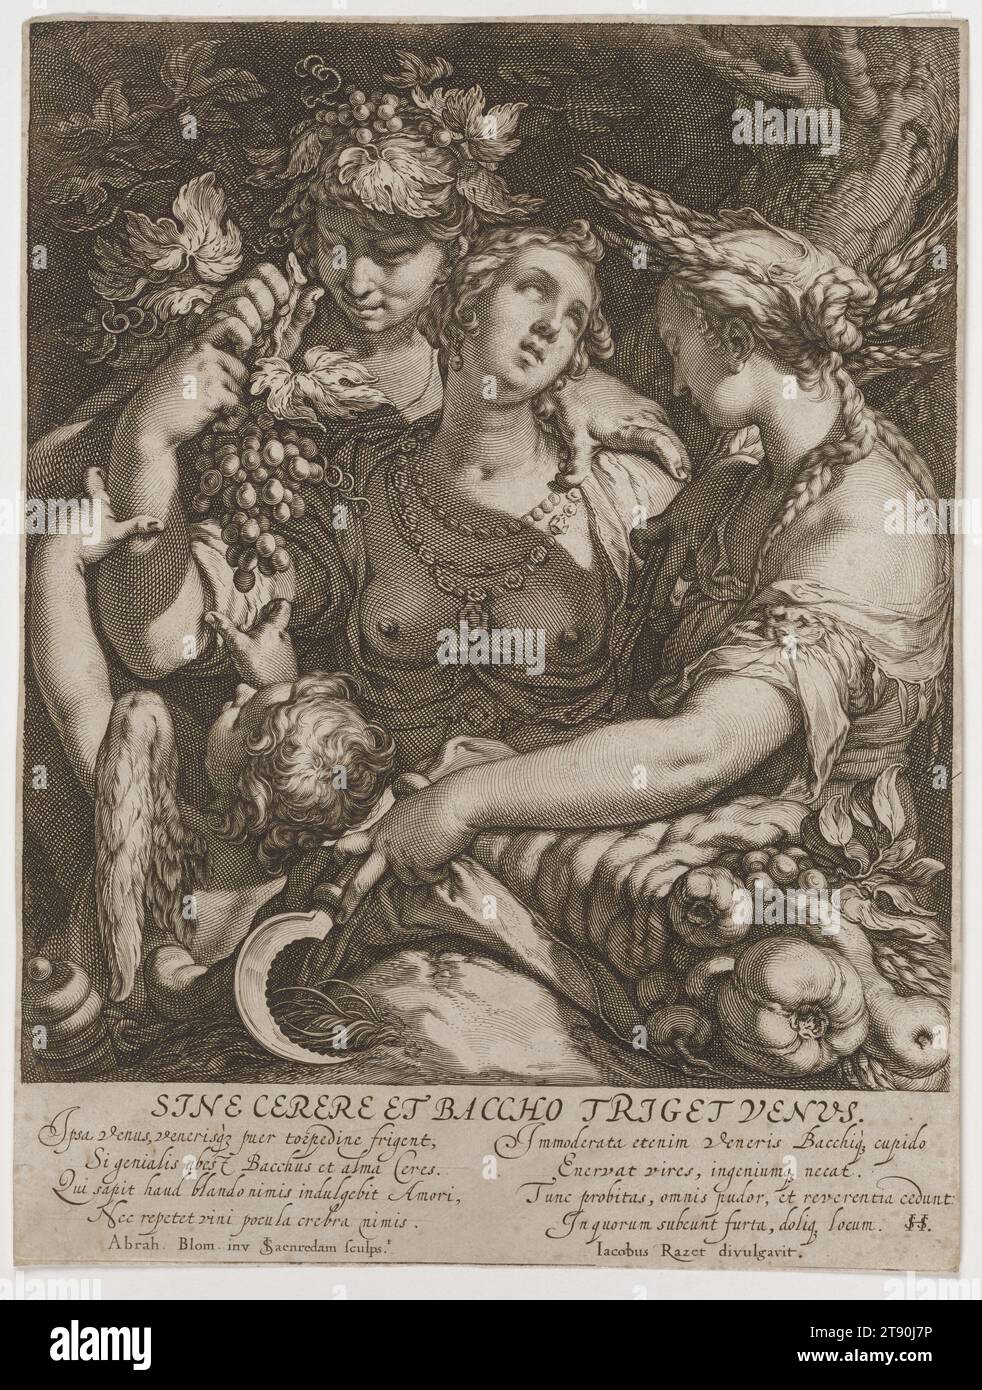 Without Baachus and Ceres, Venus Freezes, c. 1600, Jan Saenredam; Designer: Abraham Bloemaert; Publisher: Jacques Razet, Dutch, 1566–1651, 9 × 7 15/16 in. (22.86 × 20.16 cm) (image)10 5/8 × 8 in. (26.99 × 20.32 cm) (sheet), Engraving, Netherlands, 16th-17th century, 'Without Bacchus and Ceres, Venus Freezes' is an allegory that can be interpreted as 'Without wine and food, love freezes.' Here we see Bacchus and Ceres, the god and goddess of wine and agricultural fertility, embracing Venus, goddess of love, helping to keep her warm. The infant god of love, Cupid, reaches up to pluck a grape Stock Photo